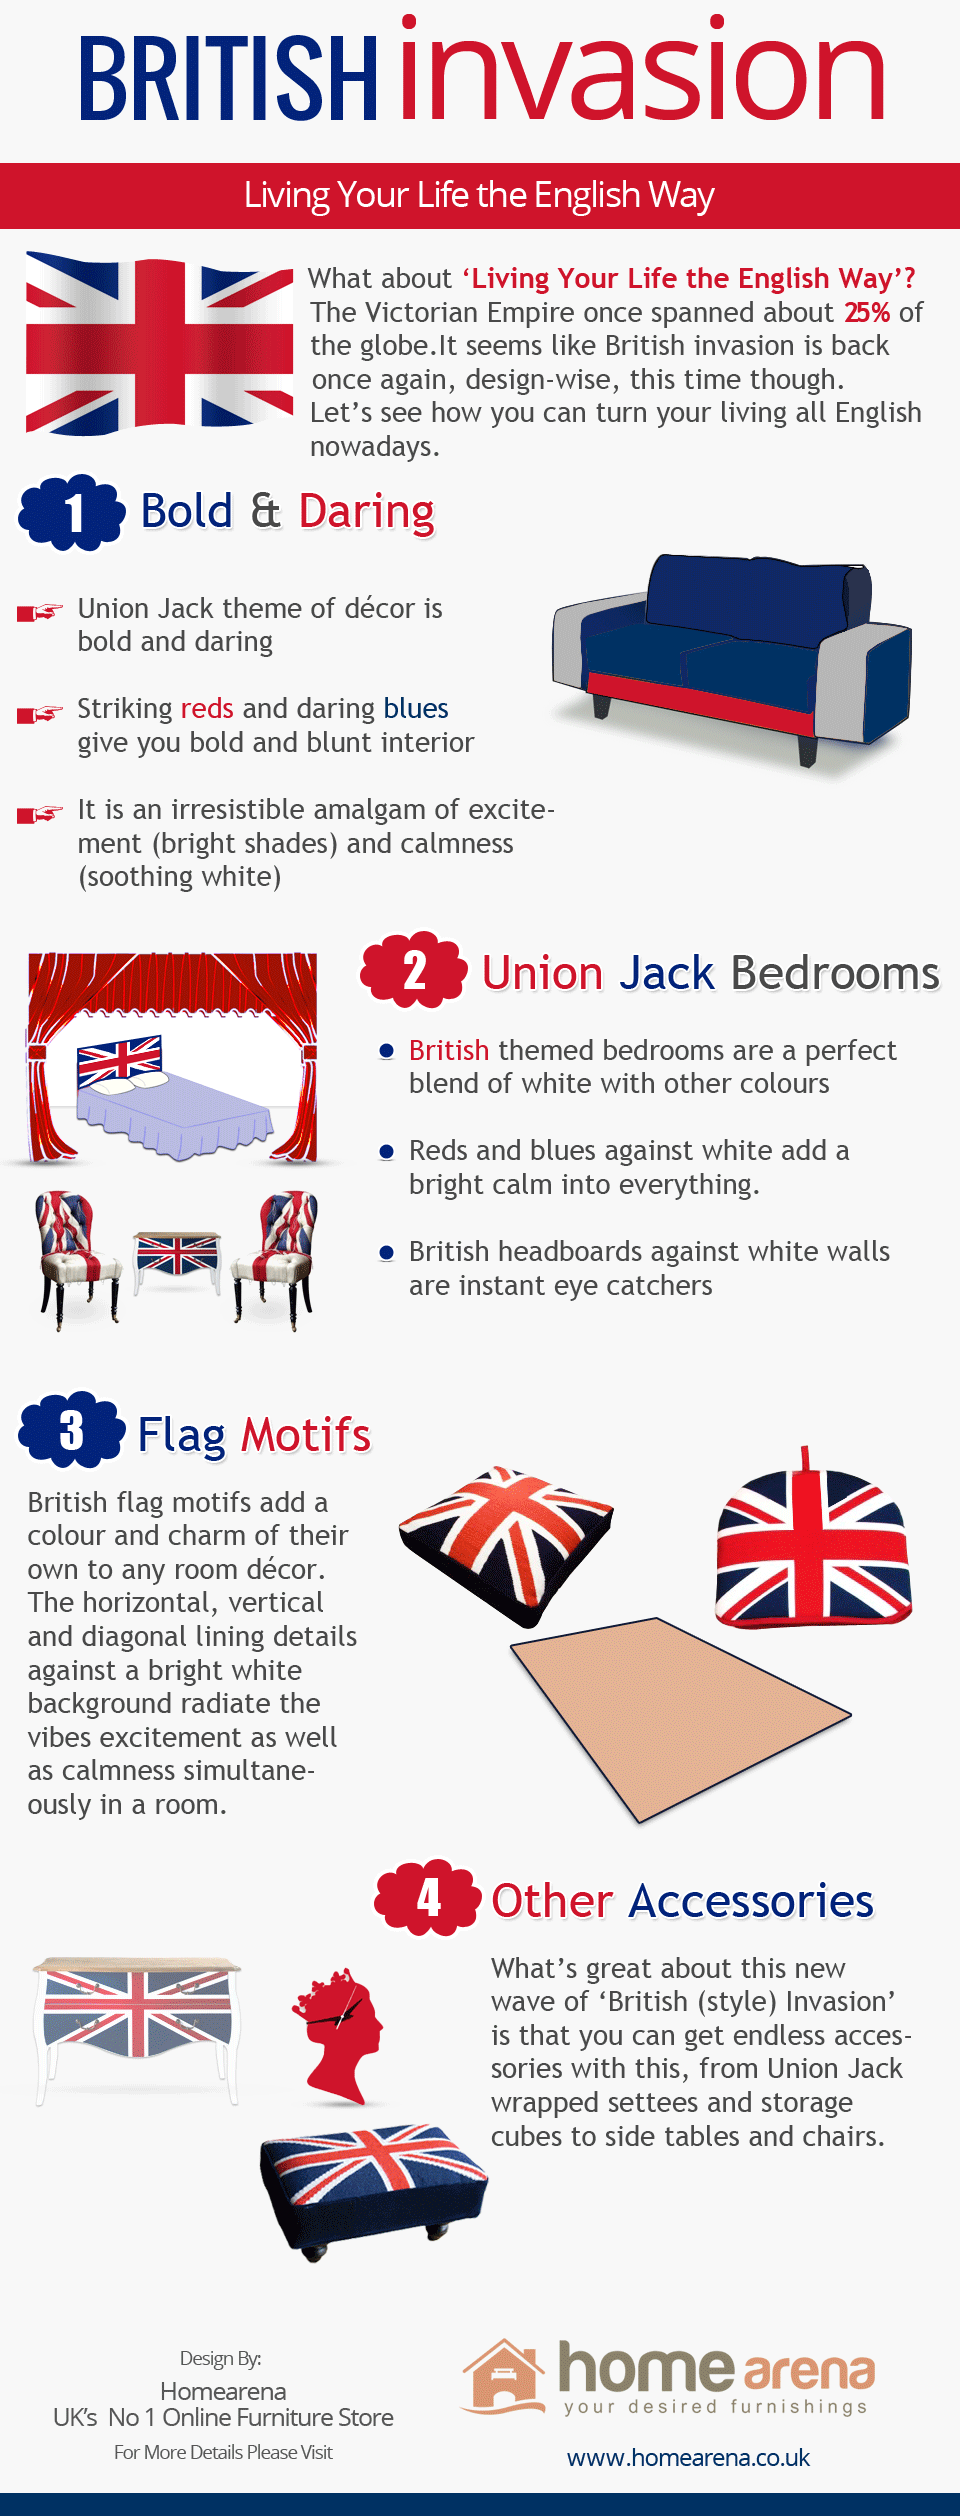 British Invasion: Living Your Life the English Way Infographic